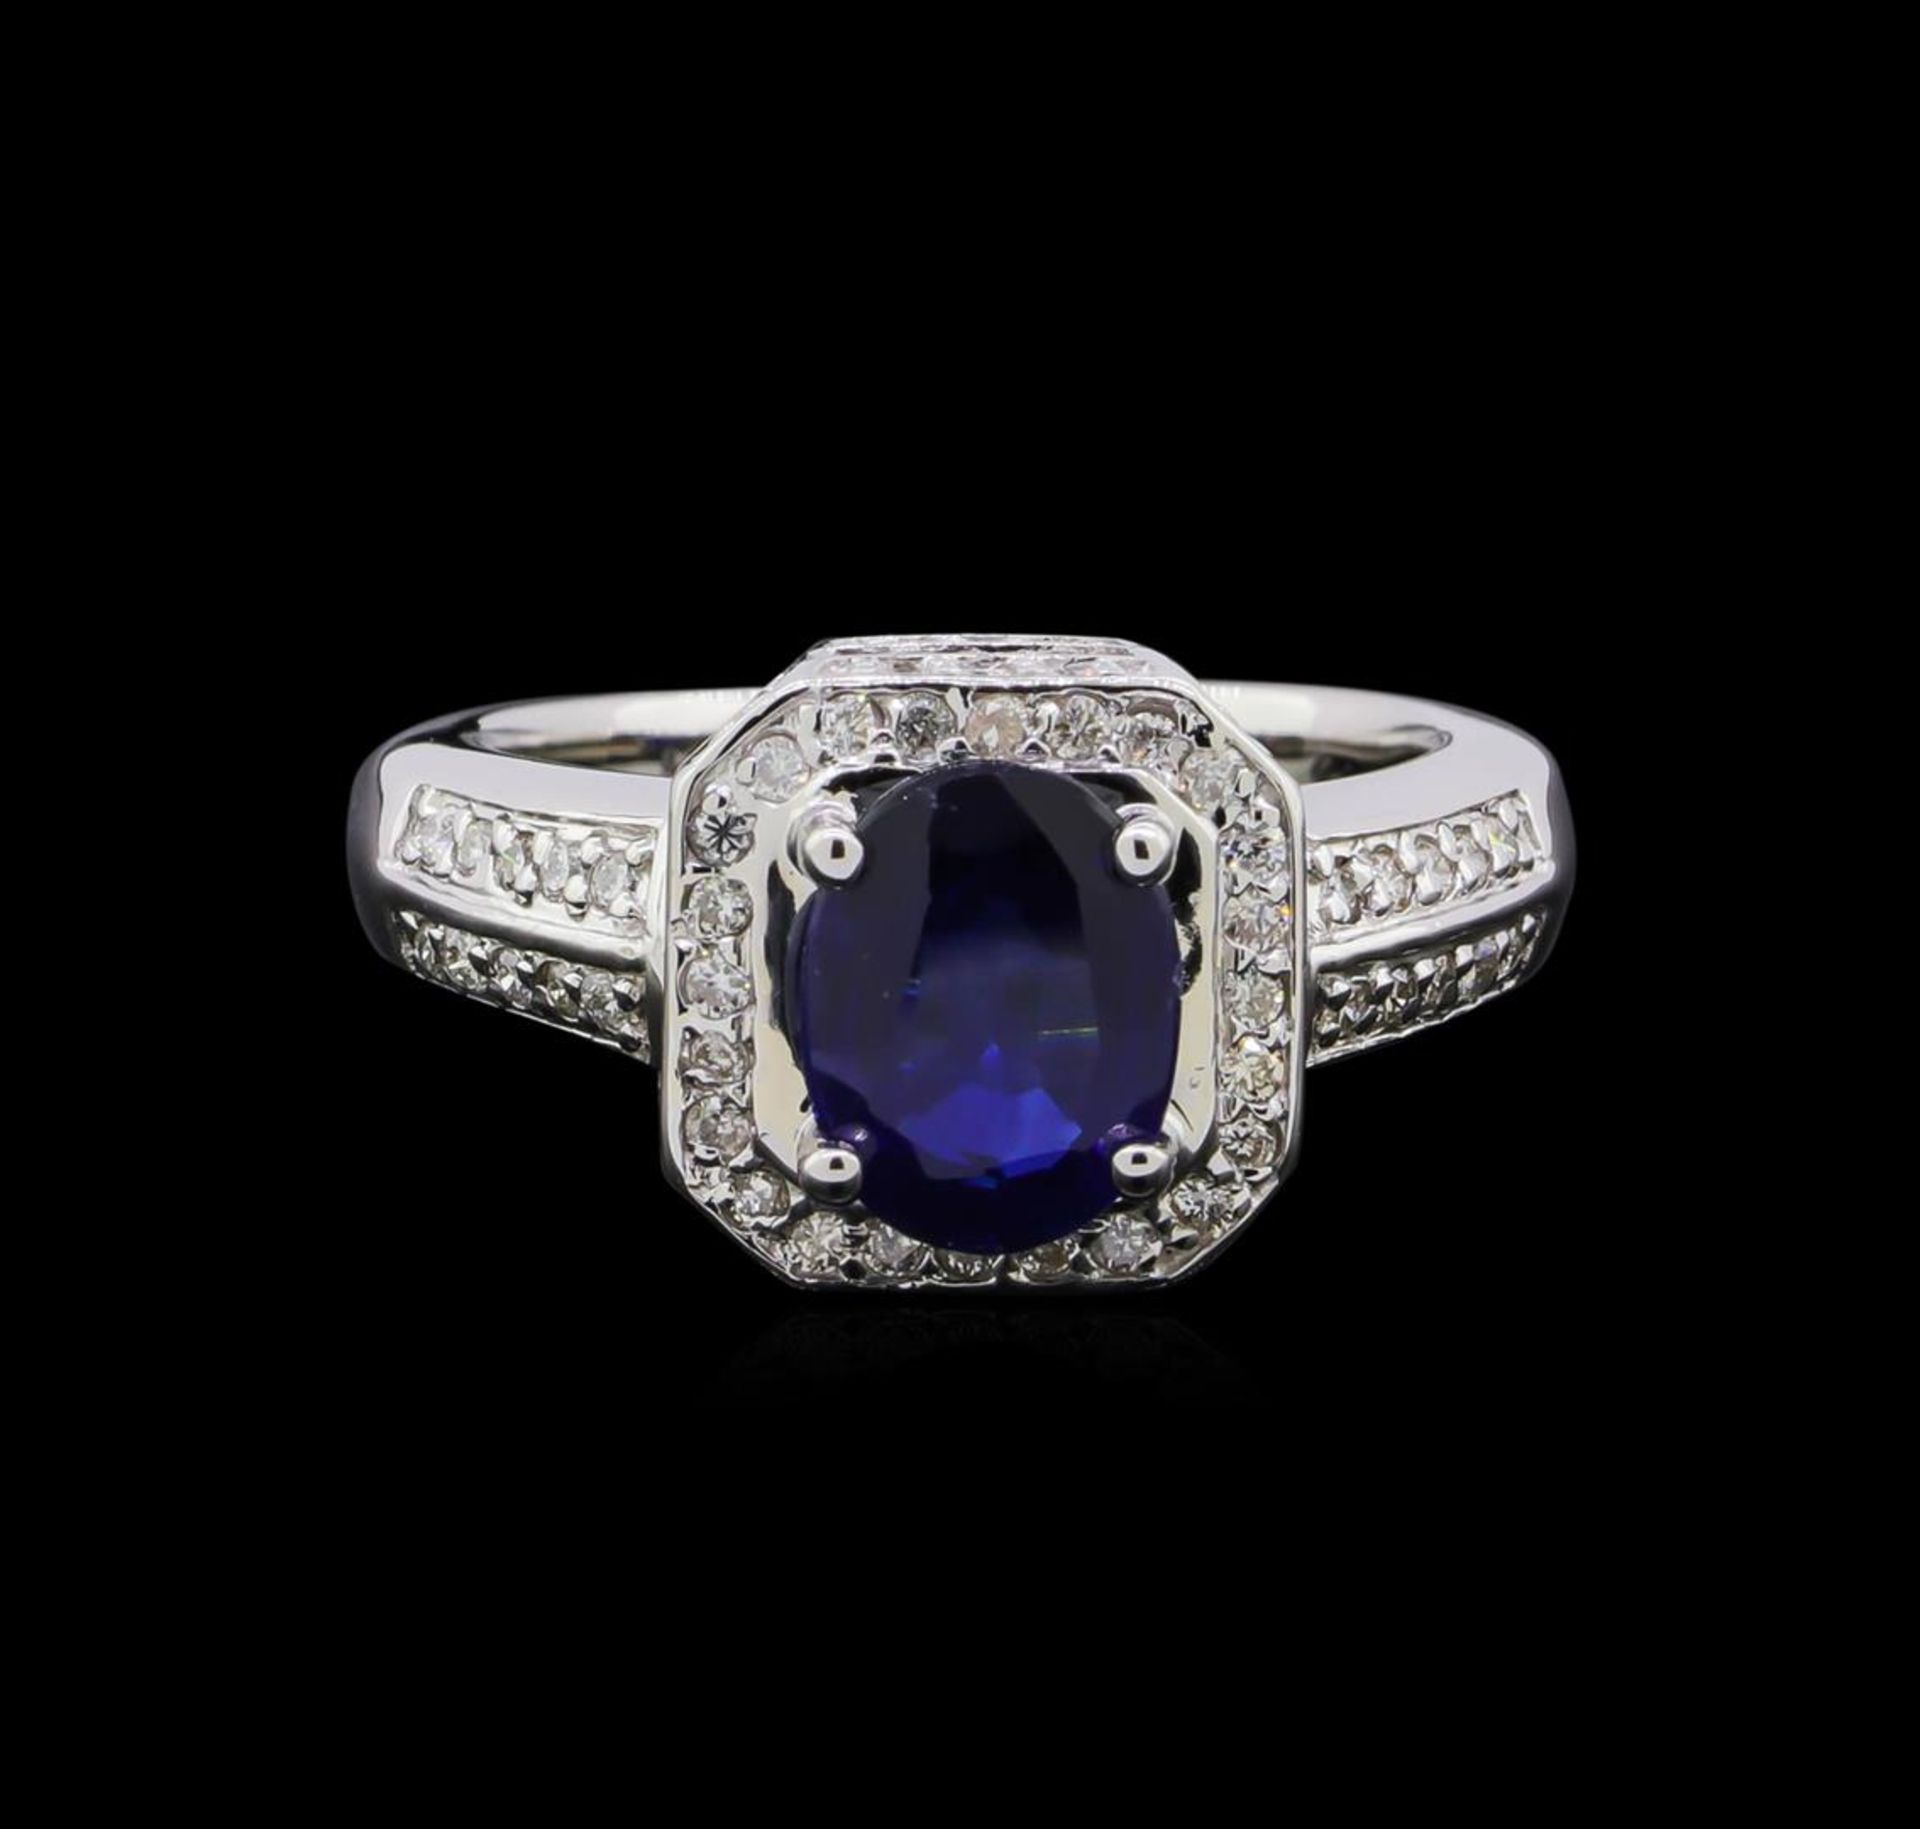 1.60 ctw Sapphire and Diamond Ring - 14KT White Gold - Image 2 of 4